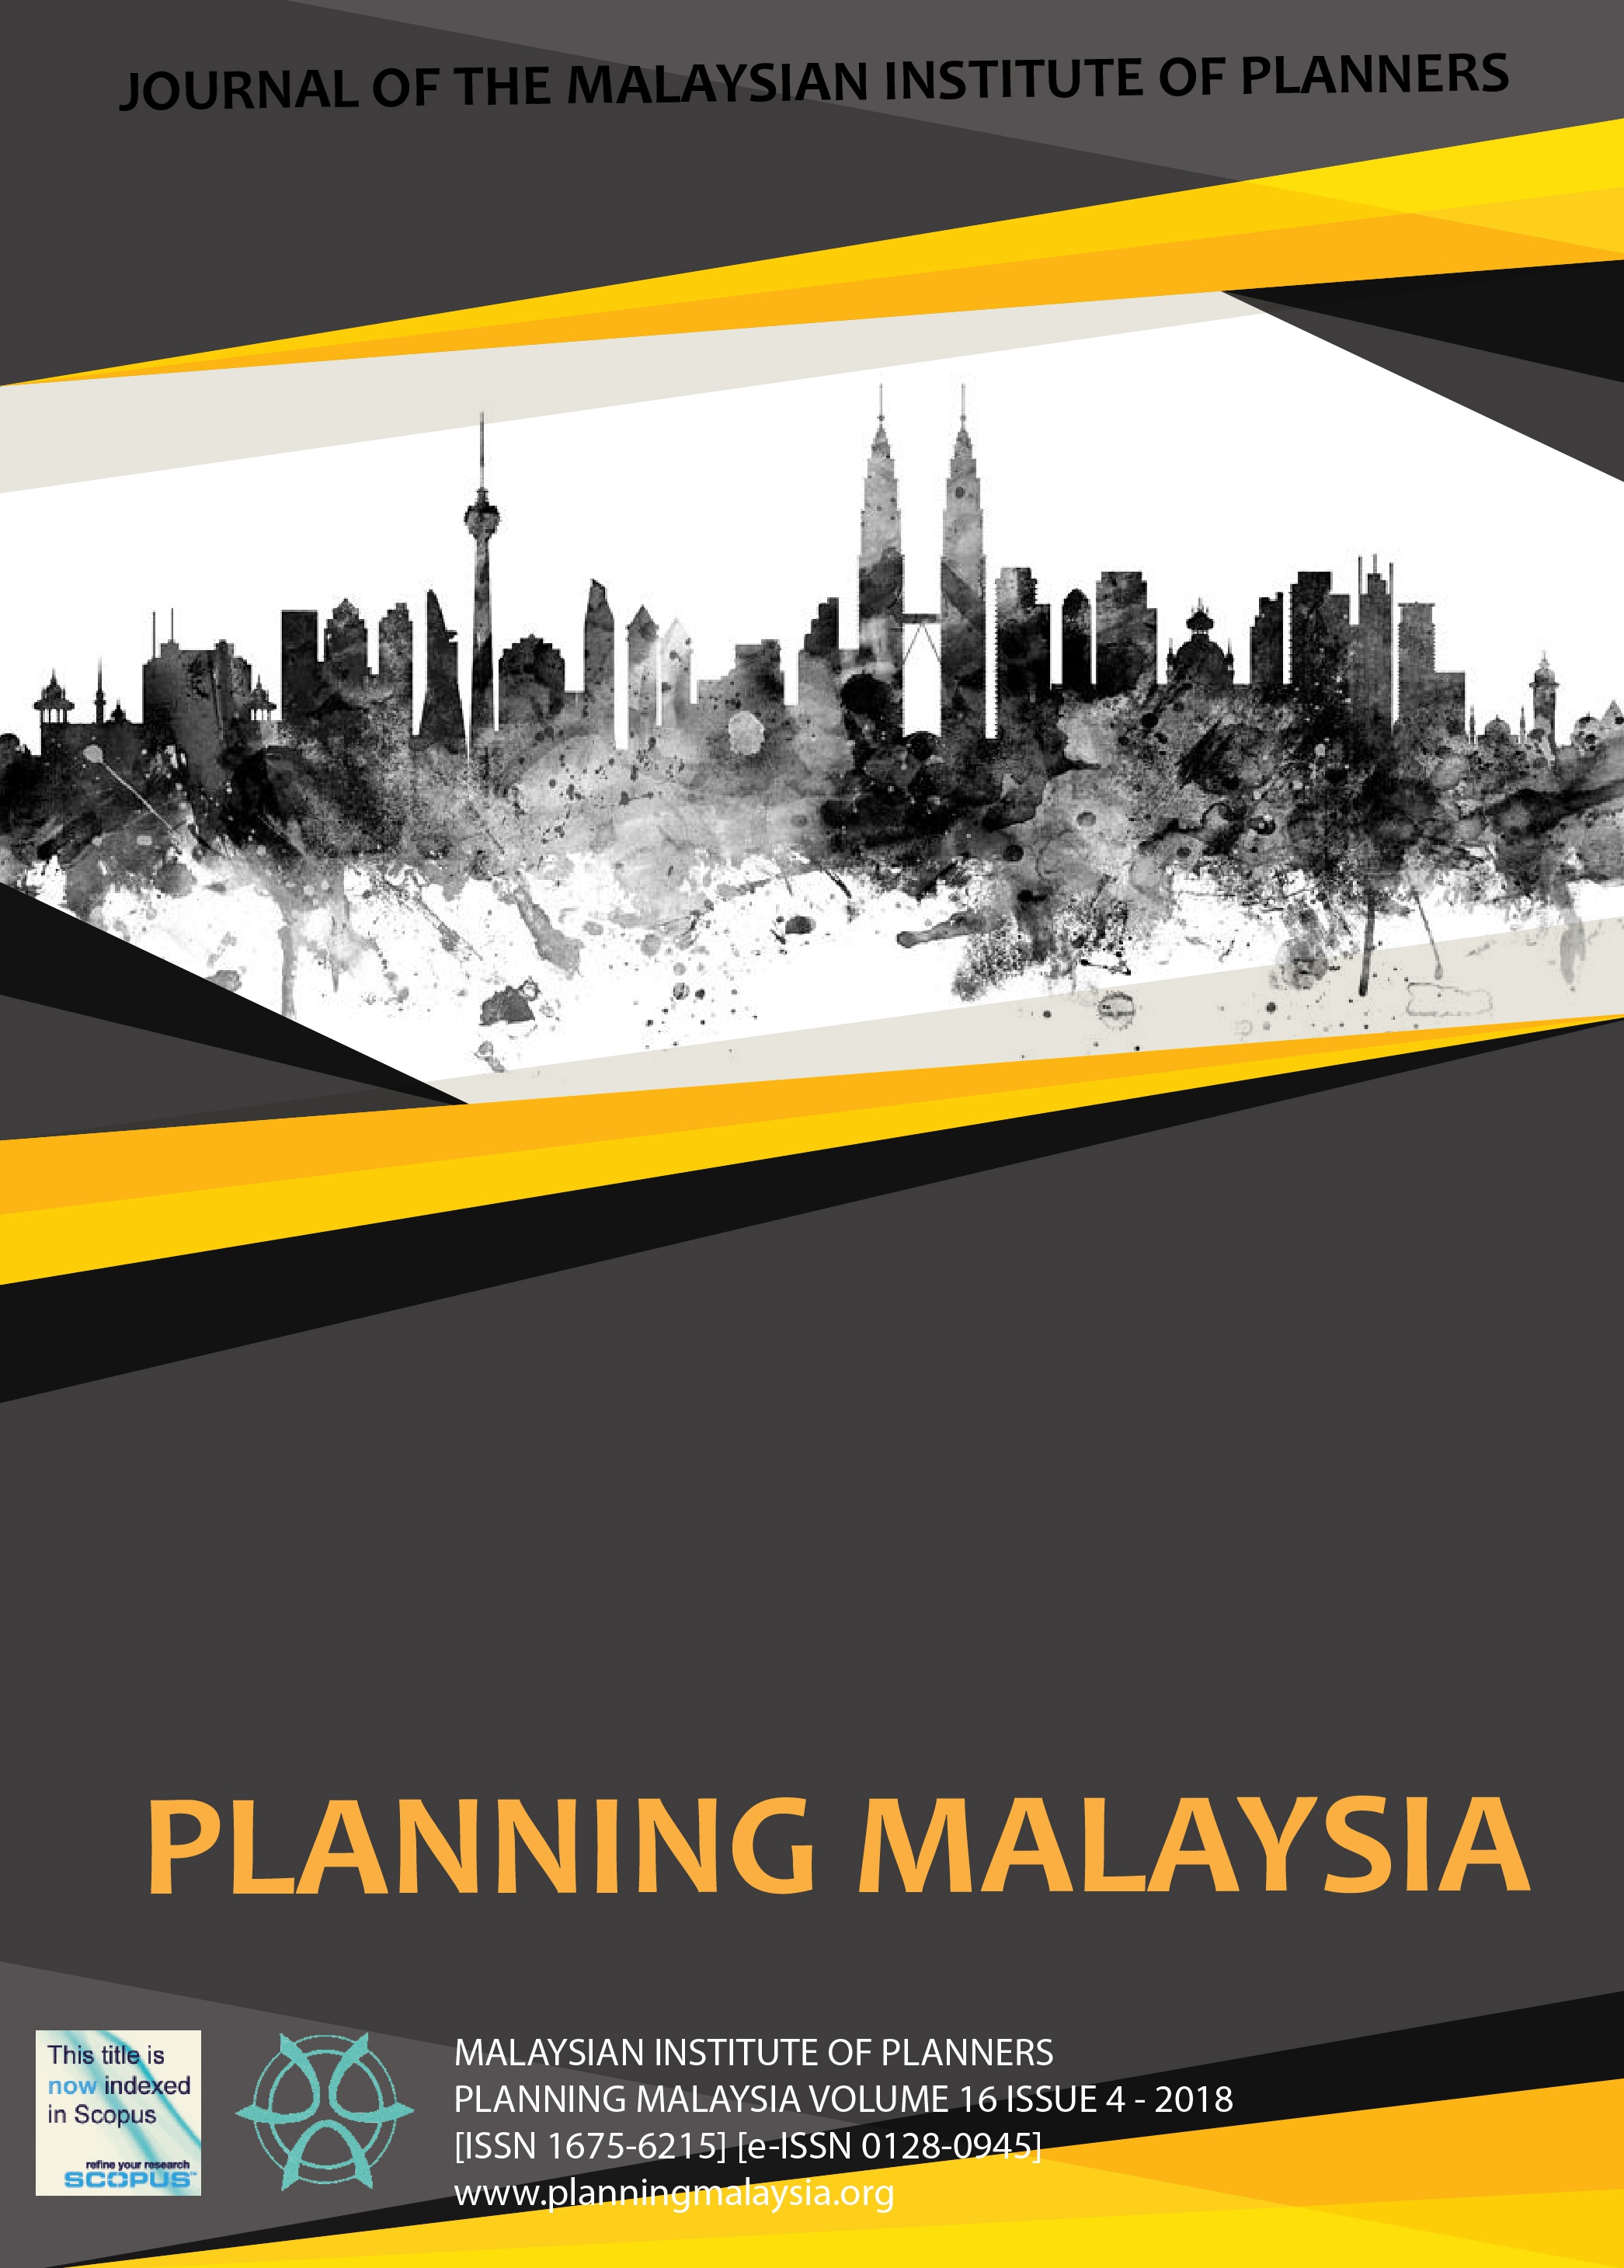 					View Vol. 16 (2018): PLANNING MALAYSIA JOURNAL : Volume 16, Issue 4, 2018
				